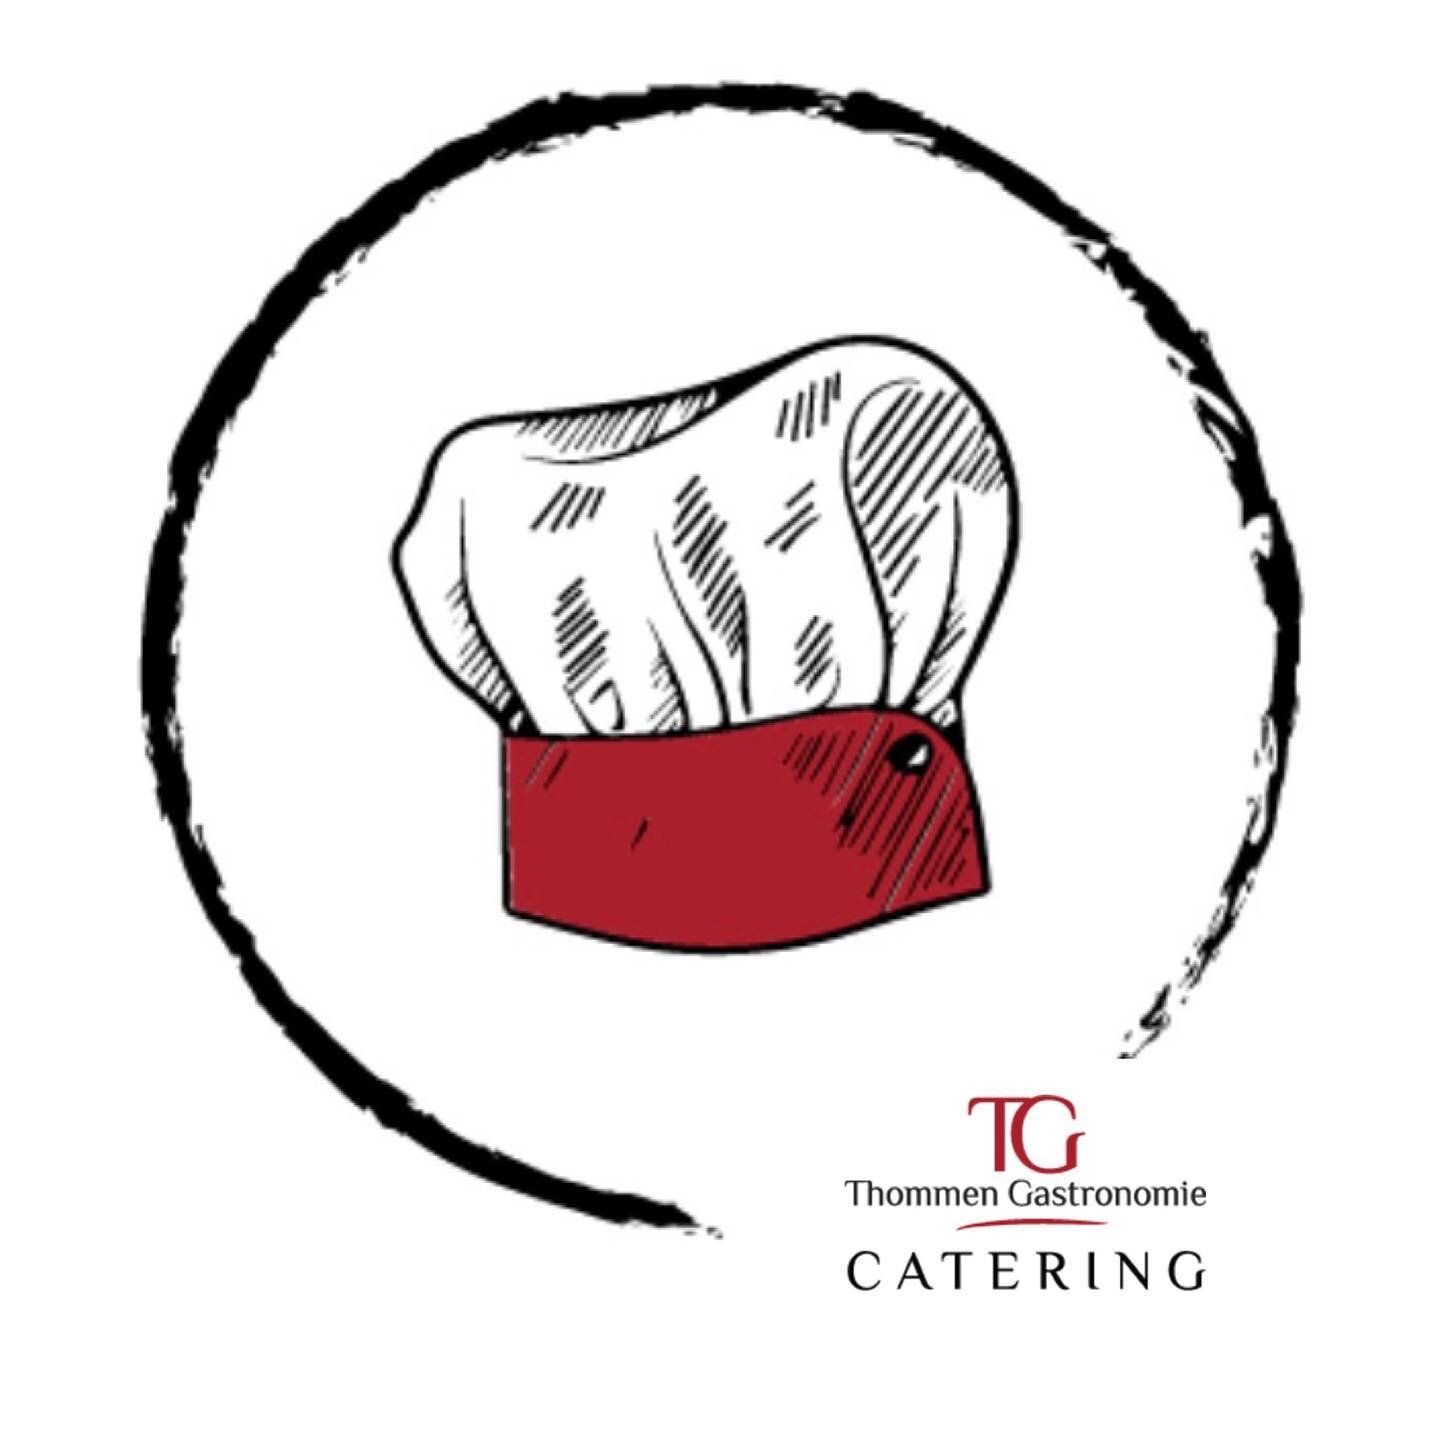 Unsere neue Homepage ist online www.tg-catering.ch #homepage #tgcatering #thommengastronomie #catering #newpage #hochzeit #firmenevent #veranstaltung #events